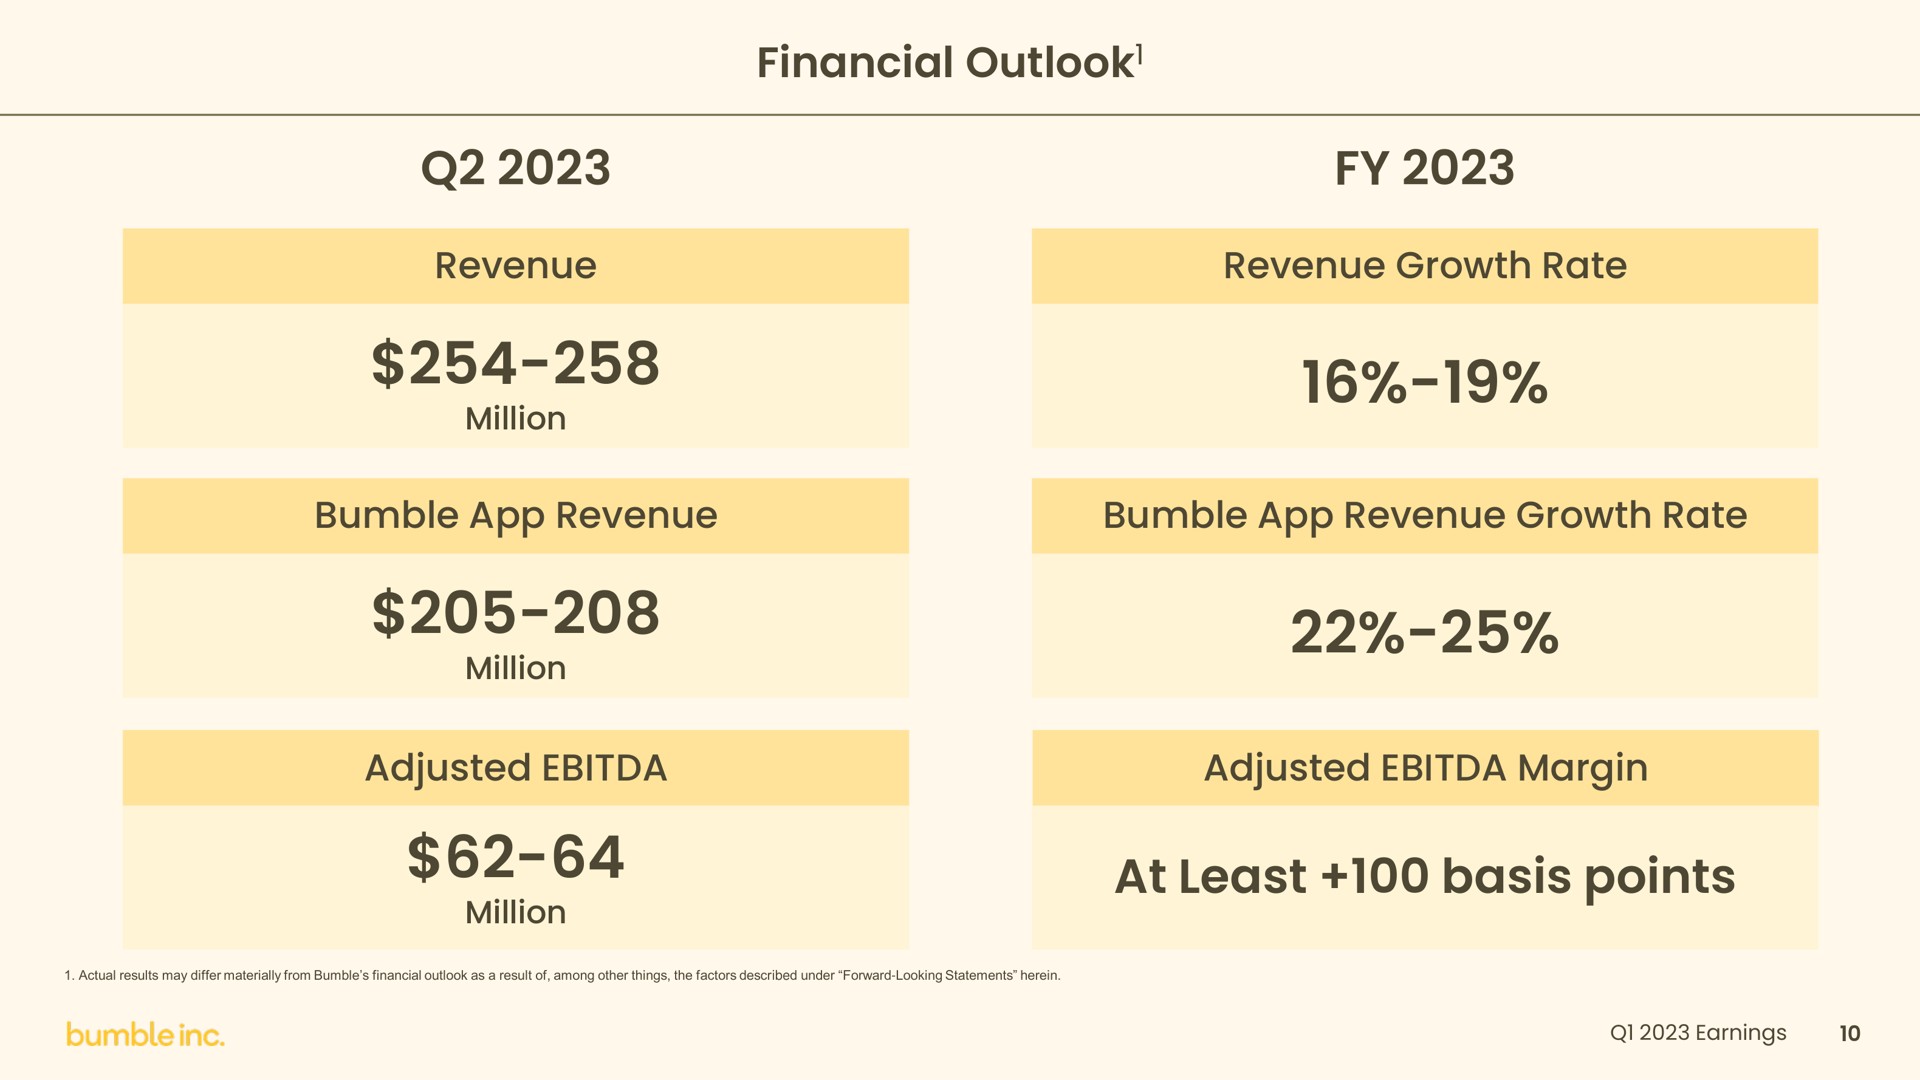 financial outlook revenue revenue growth rate bumble revenue bumble revenue growth rate adjusted adjusted margin at least basis points outlook | Bumble